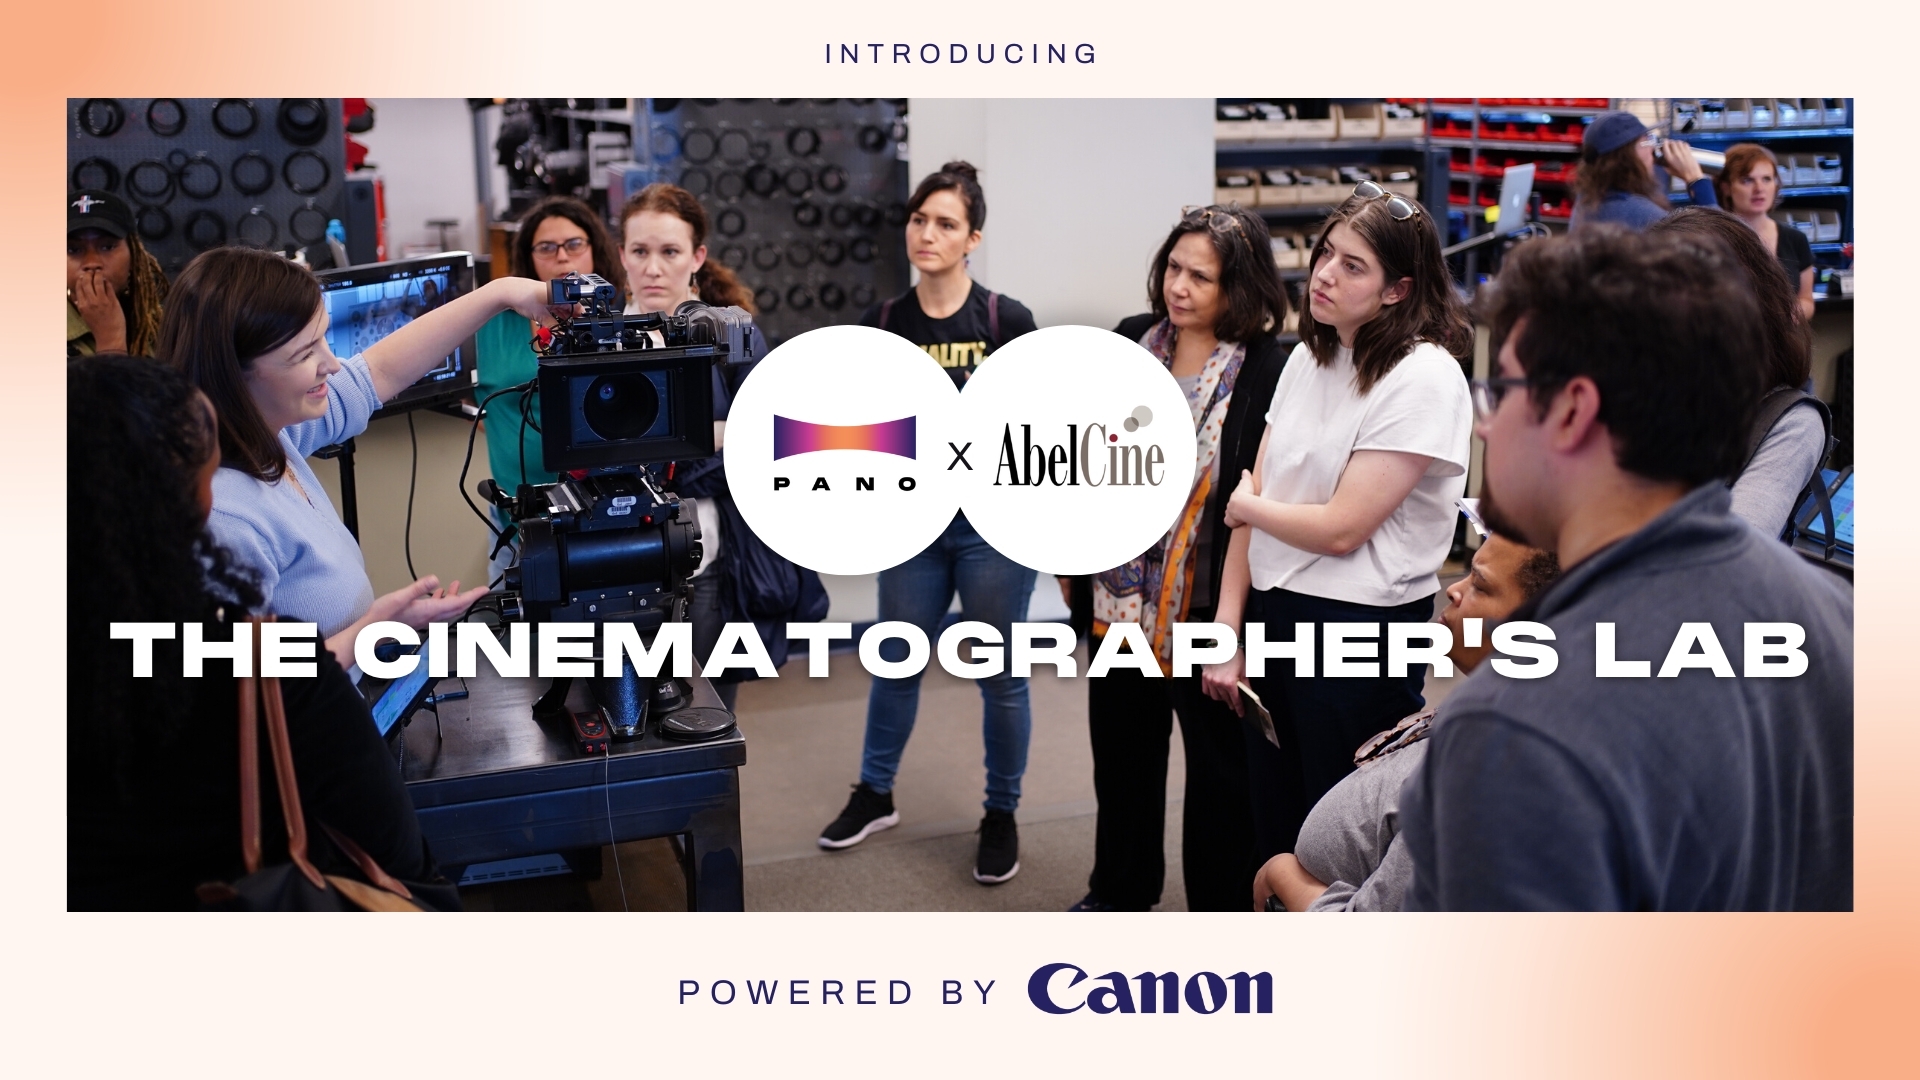 Introducing The Cinematographer's Lab by PANO x AbelCine, powered by Canon